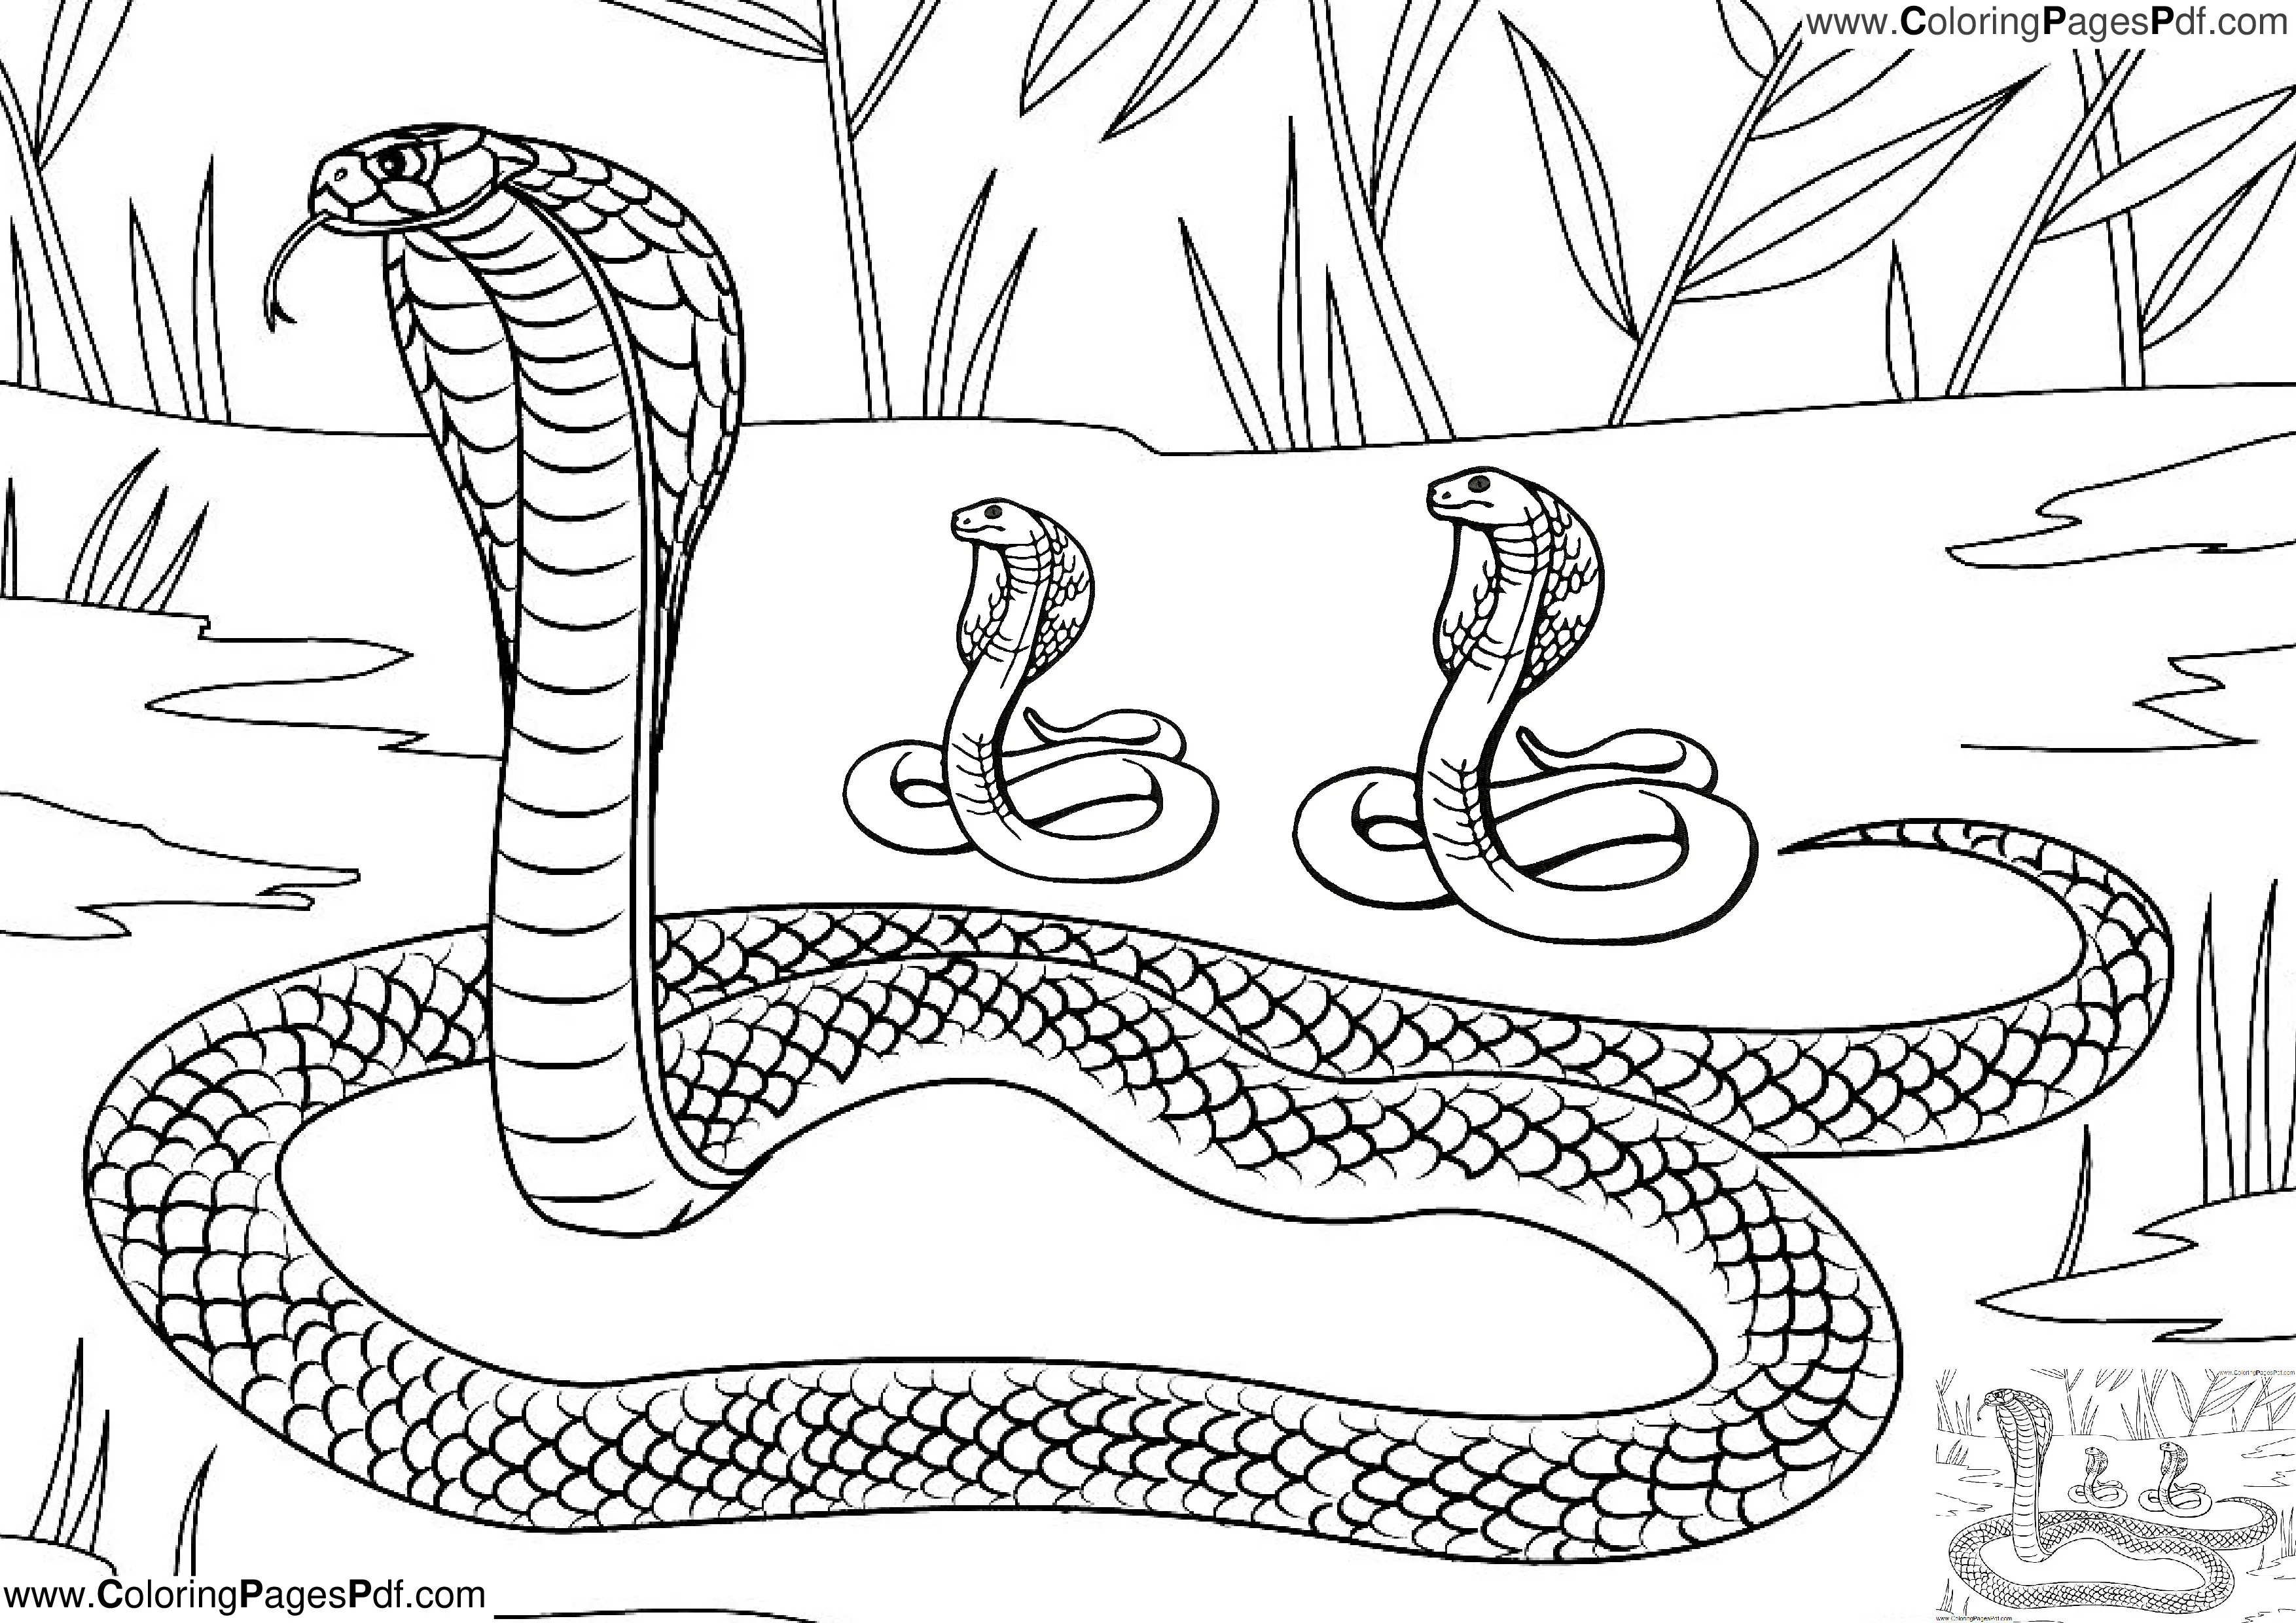 Best snake coloring pages